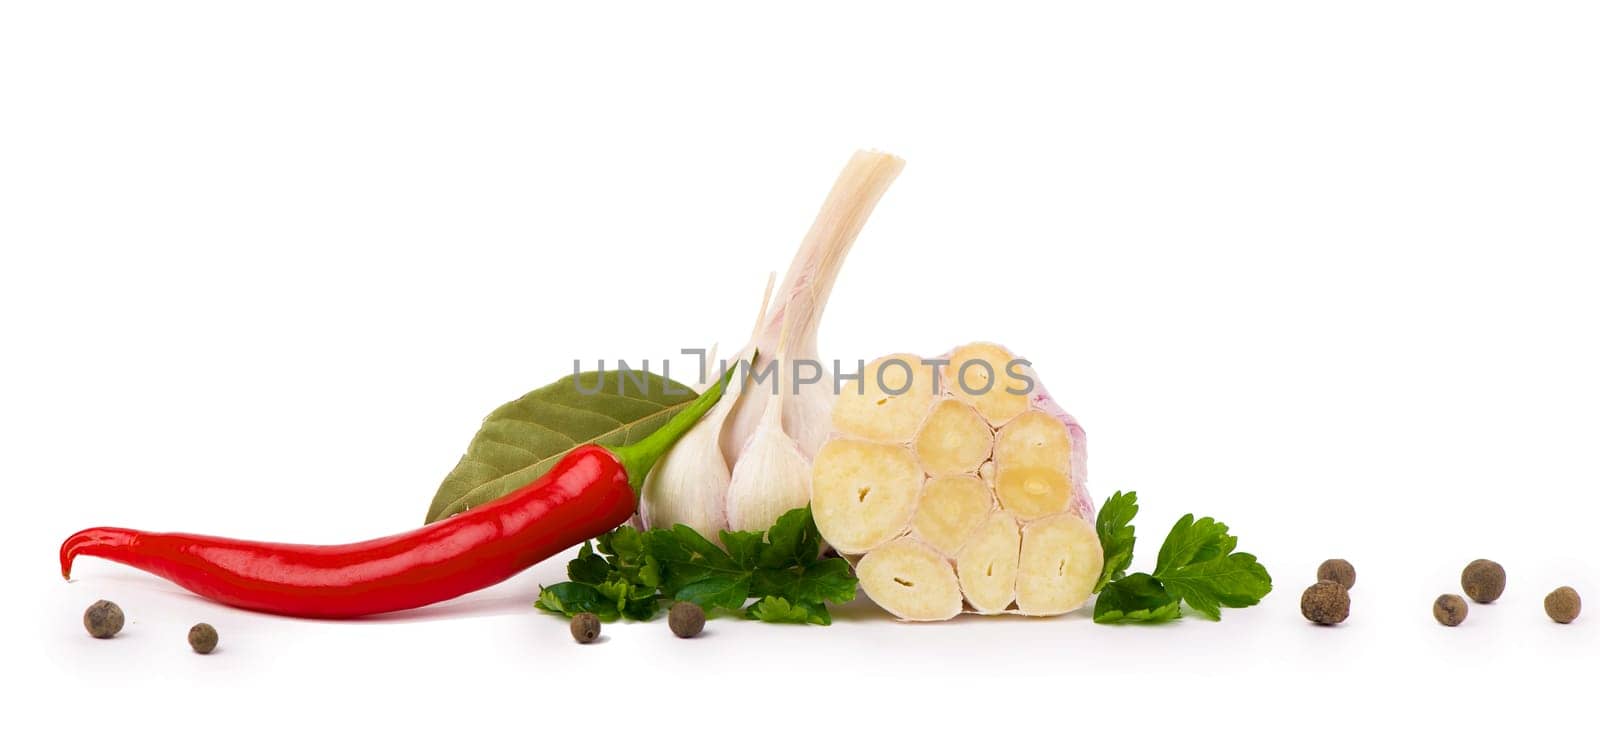 Ingredients for preservation cut young garlic, pepper, bay leaf on a white background Head of young garlic with garlic cloves and parsley leaf isolated on white background. by aprilphoto